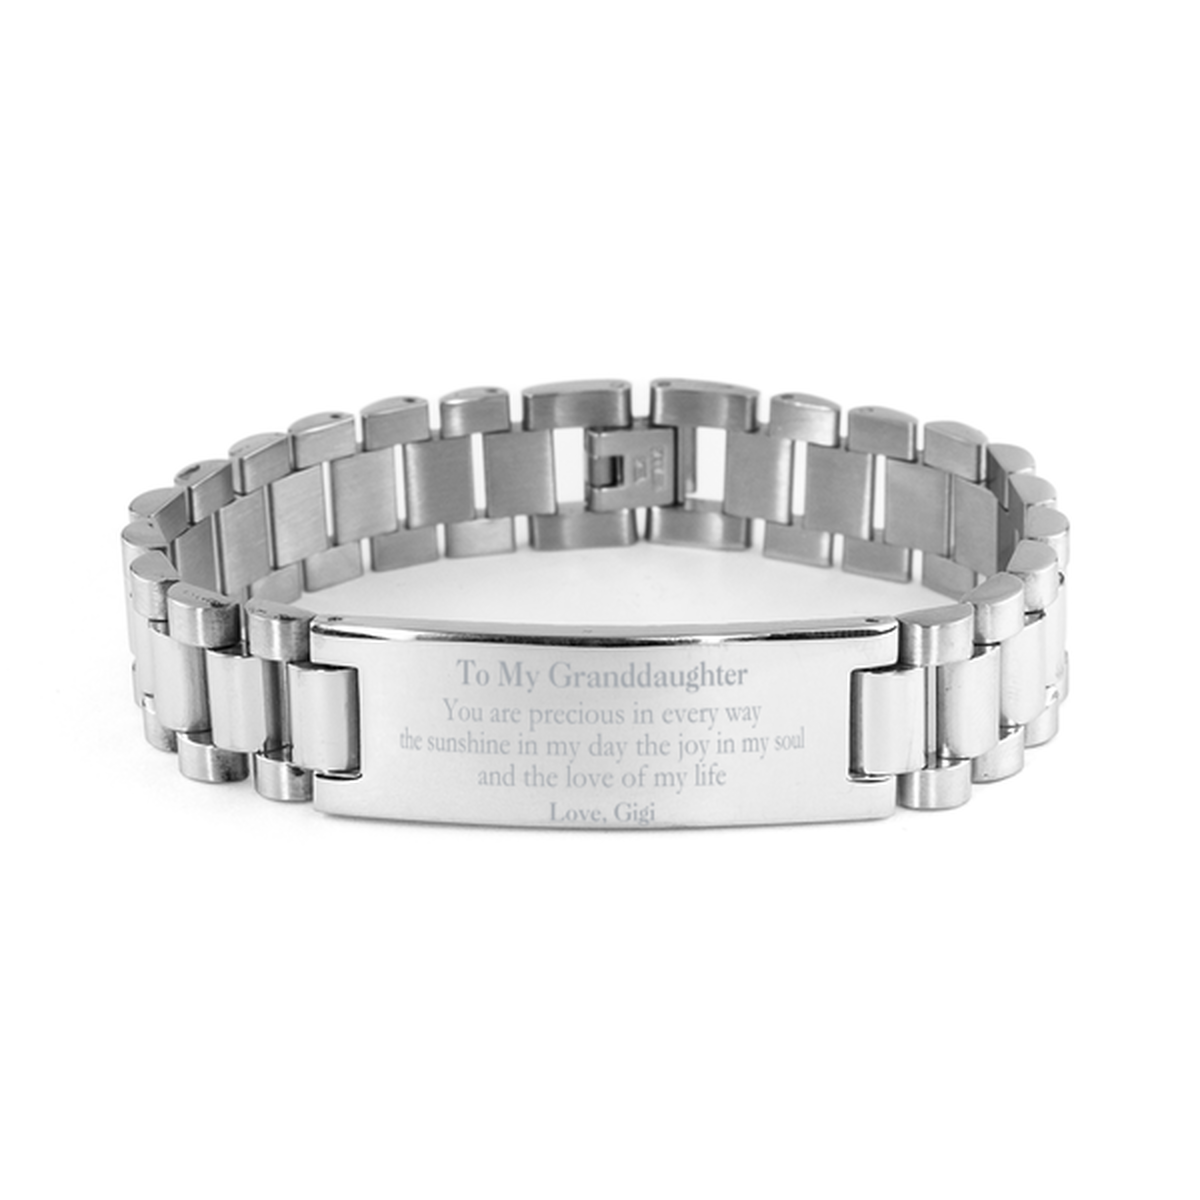 Graduation Gifts for Granddaughter Ladder Stainless Steel Bracelet Present from Gigi, Christmas Granddaughter Birthday Gifts Granddaughter You are precious in every way the sunshine in my day. Love, Gigi